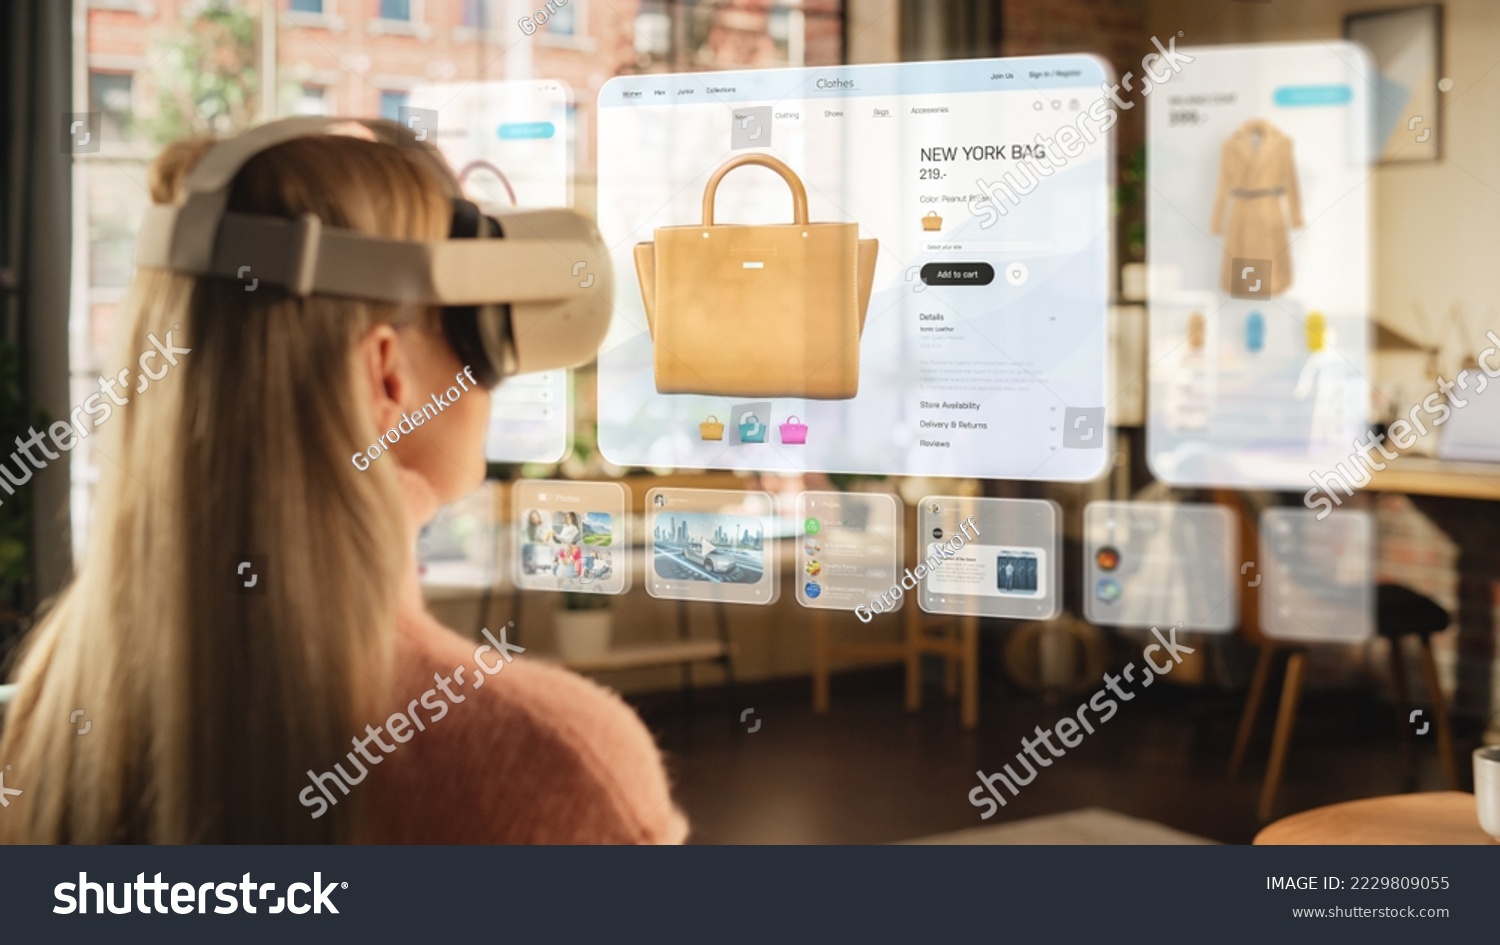 Metaverse Futuristic Concept: Woman Using Virtual Reality Headset to Shop Online from Home while Sitting in Stylish Cozy Living Room. Over the Shoulder Footage of a Female Shopper Choosing a Bag #2229809055